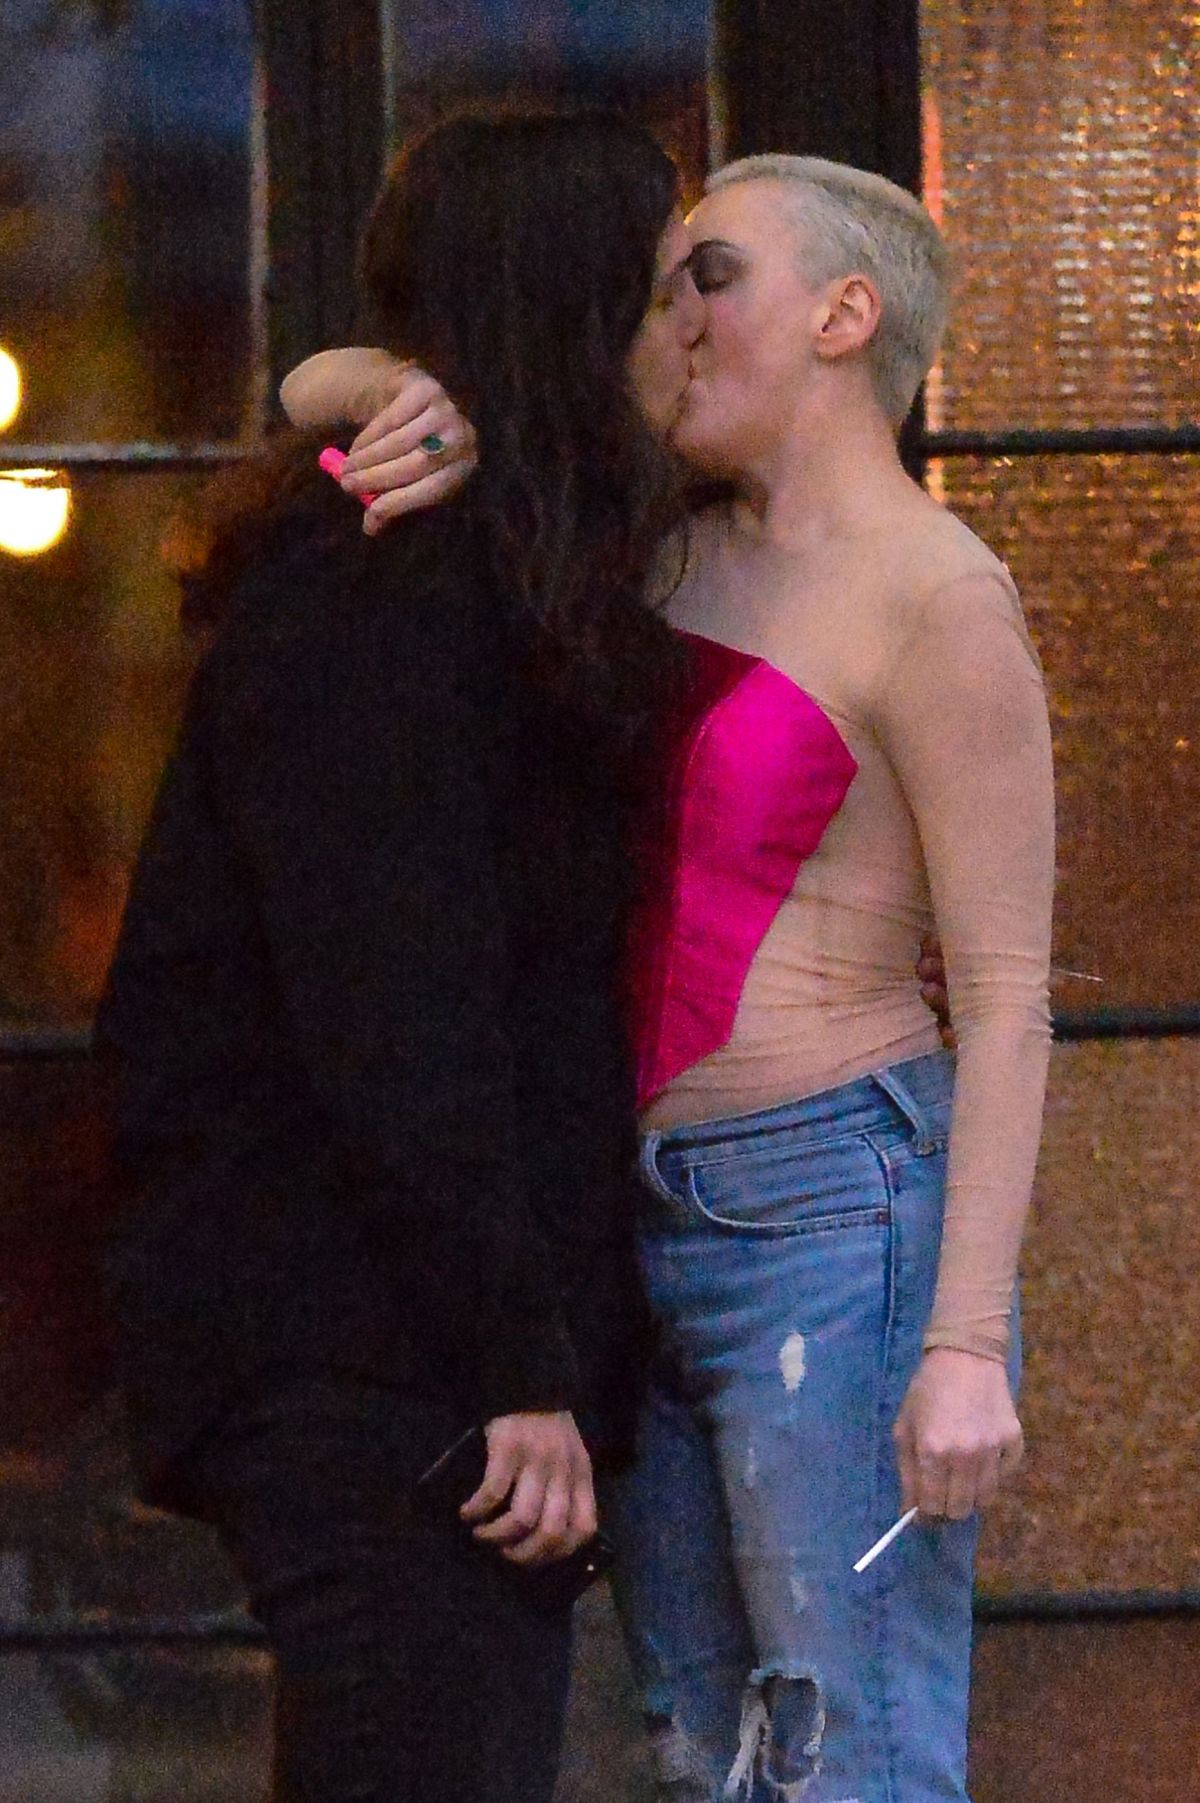 Rose Mcgowan Shares Kiss Outside Bowery Hotel In New York 09142019 Hawtcelebs